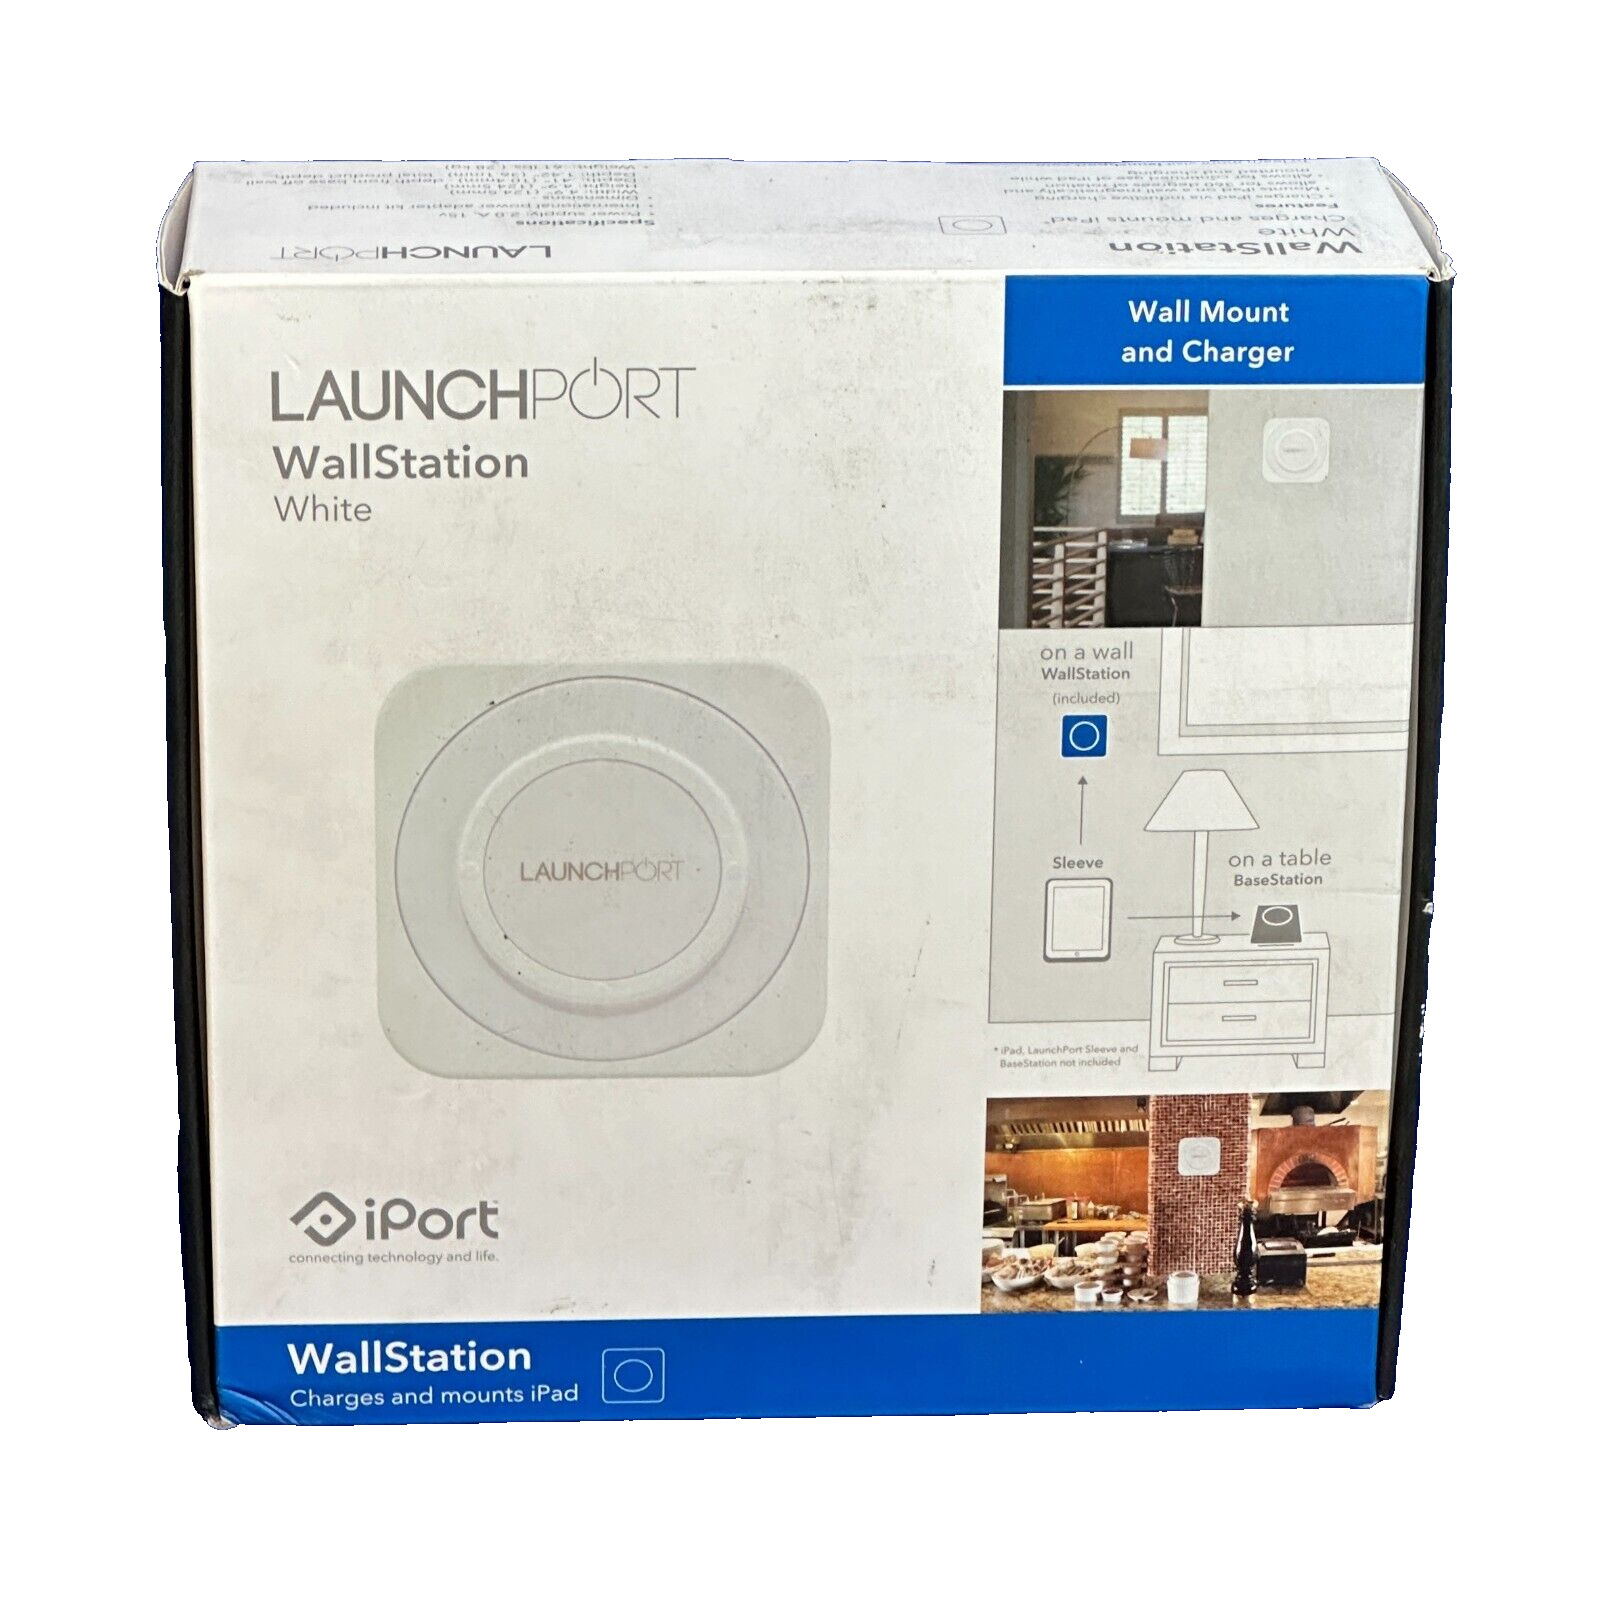 IPORT LAUNCHPORT WALLSTATION, White-Charger-iPad-Factory Sealed-NEW